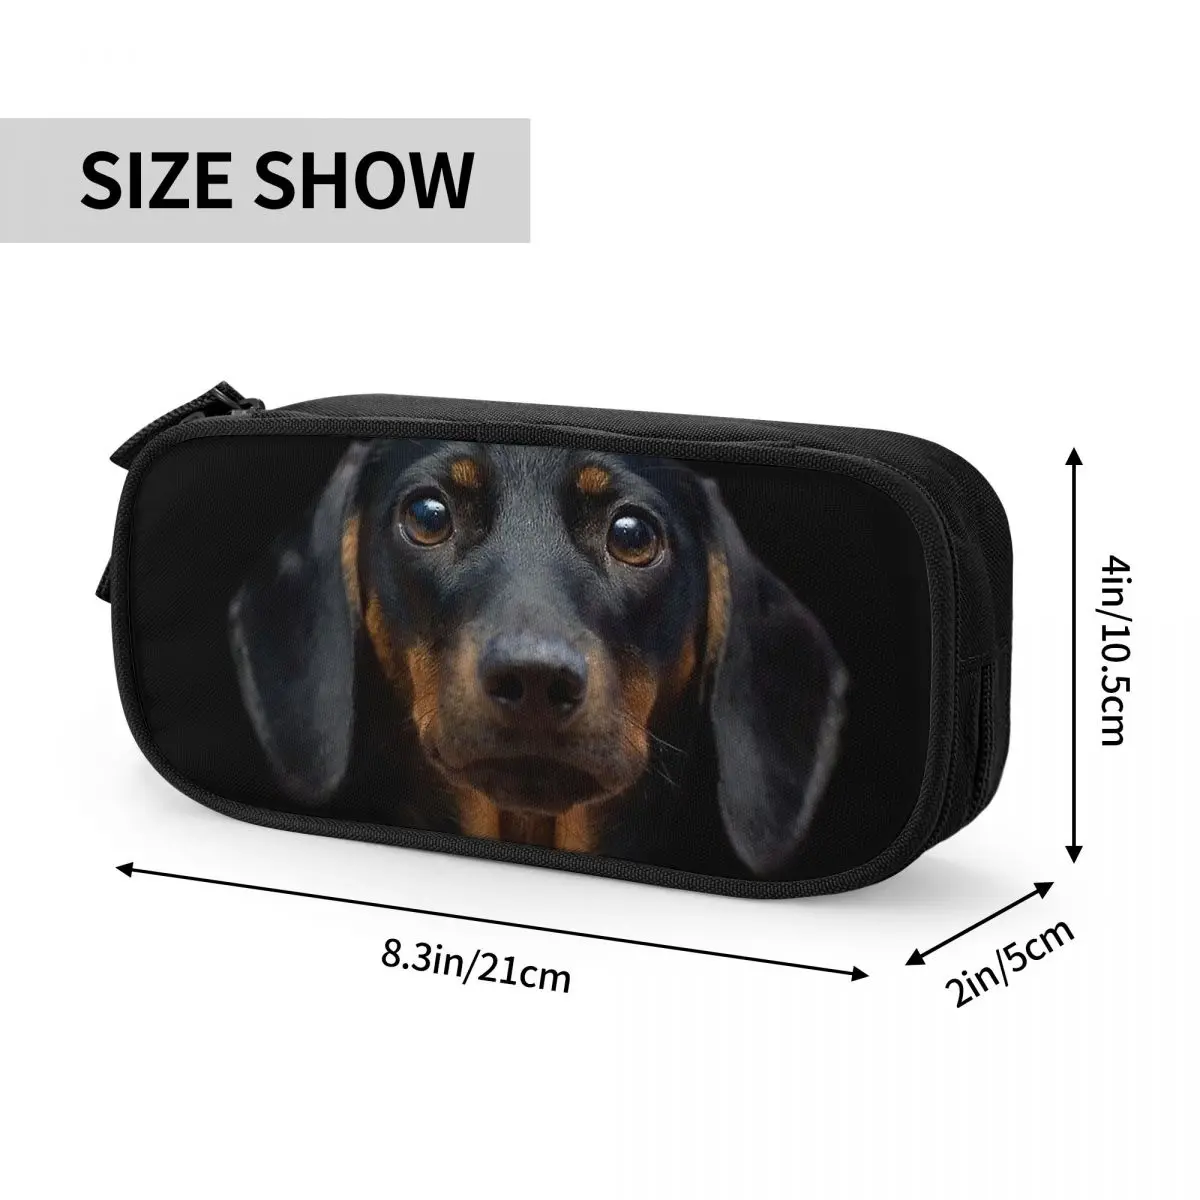 Dachshund Dog Pencil Cases Cute Wiener Sausage Doxie Pen Bags Kids Large Storage Students School Zipper Pencil Pouch images - 6